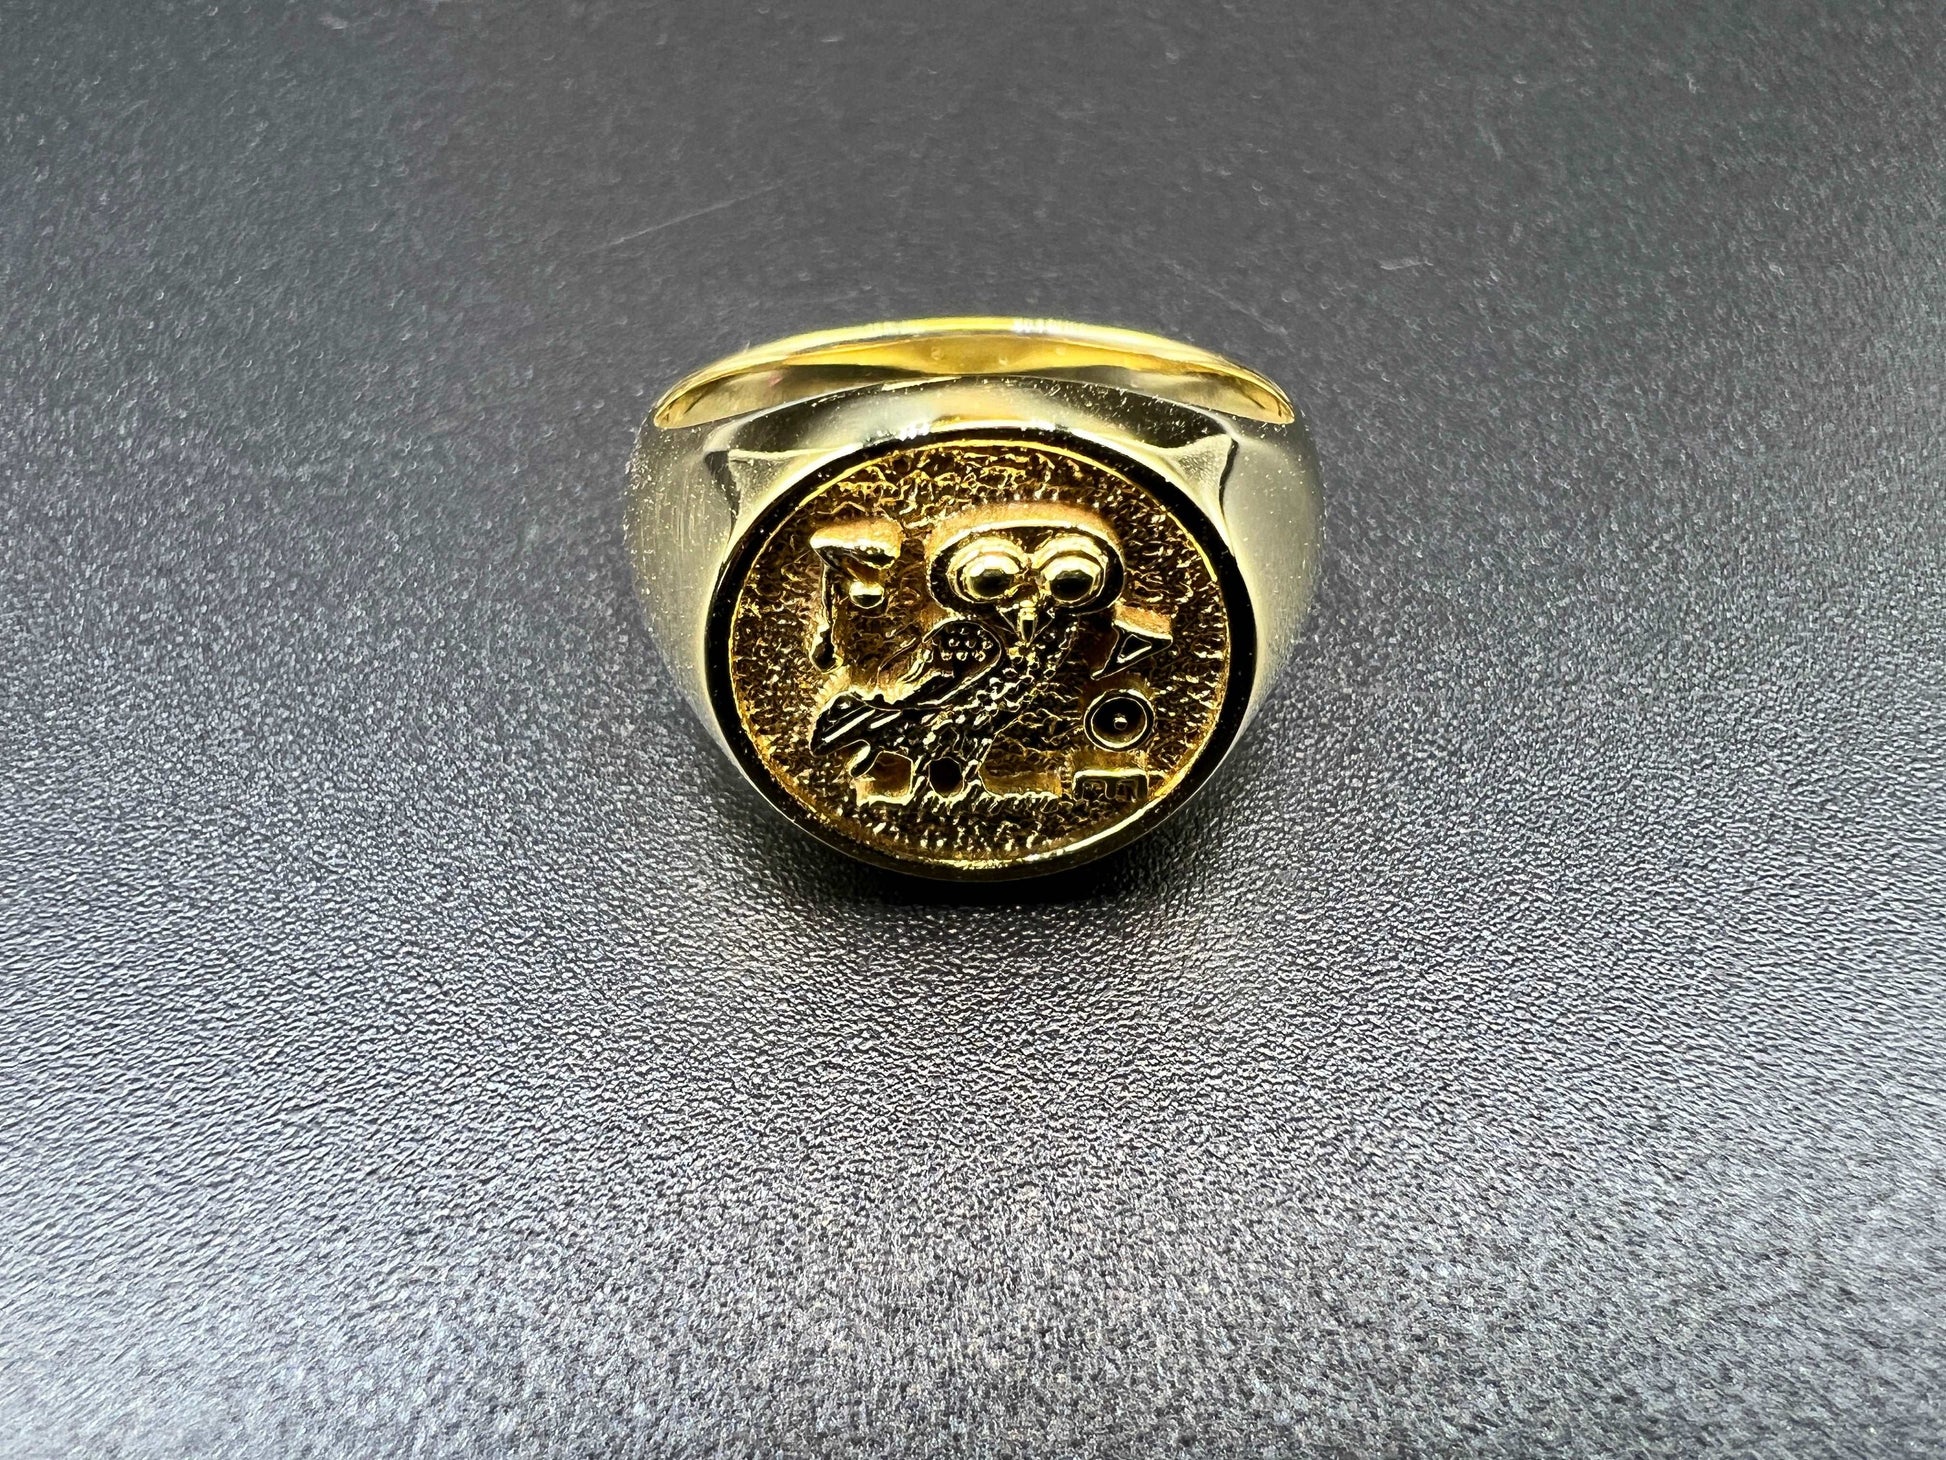 Athena owl Signet ring ancient Greek coin copy Solid gold